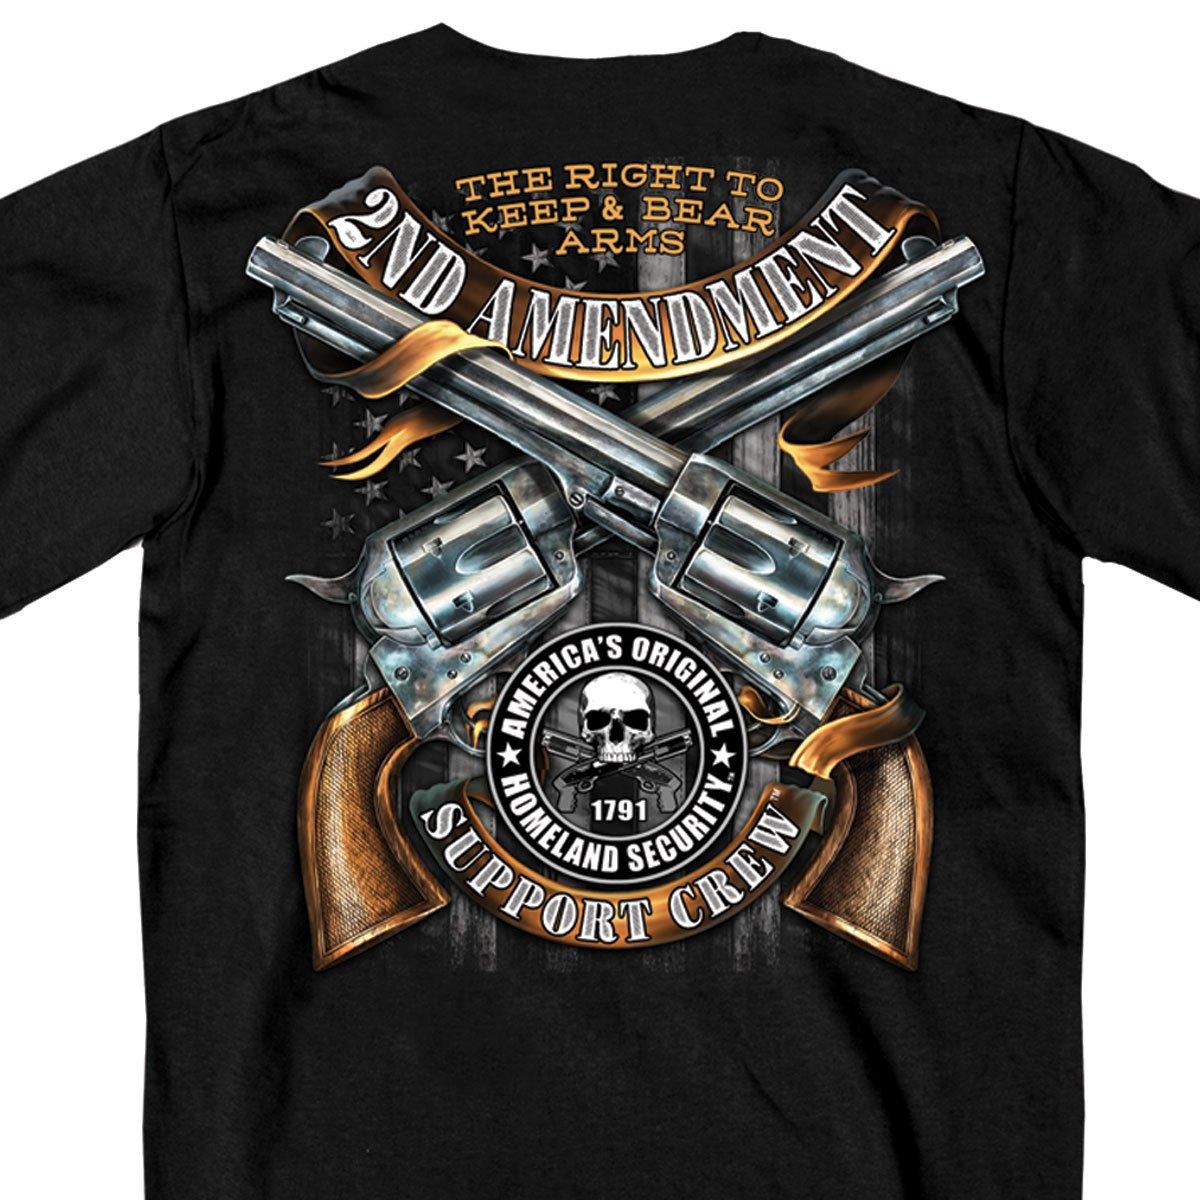 Hot Leathers Men's Crossed Pistols Short Sleeve Double Sided T-Shirt, Black - American Legend Rider